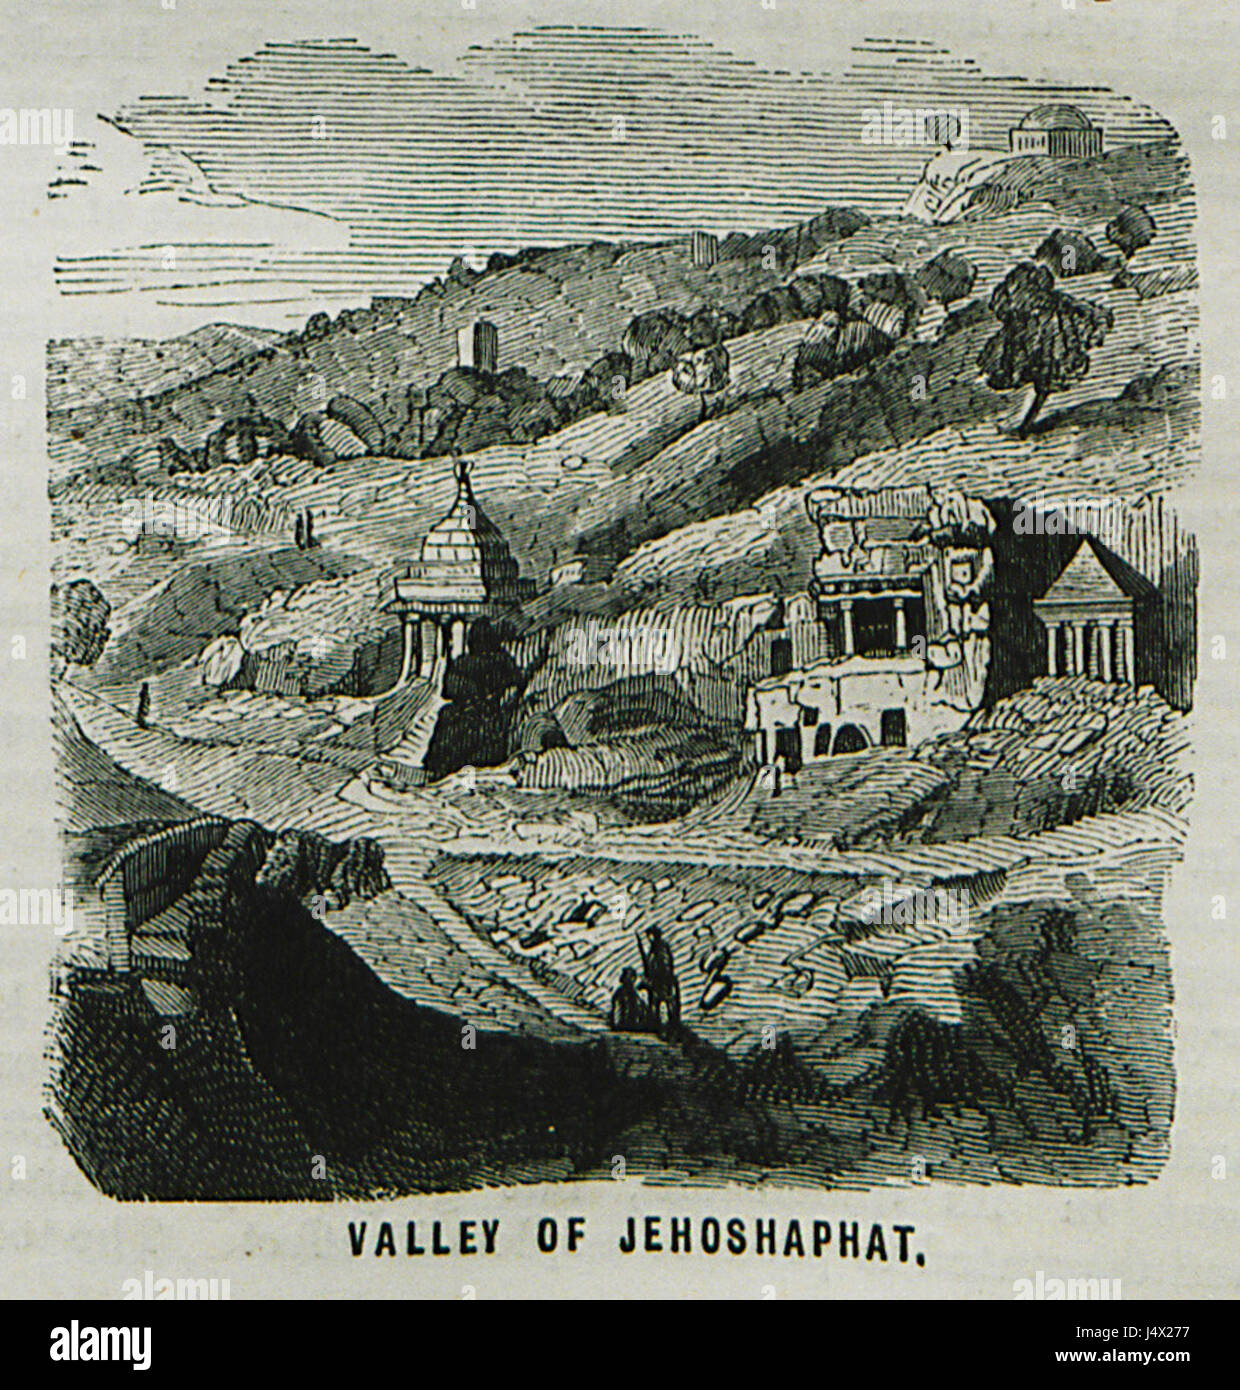 Valley of Jehoshaphat   Ainsworth William Francis   1870 Stock Photo